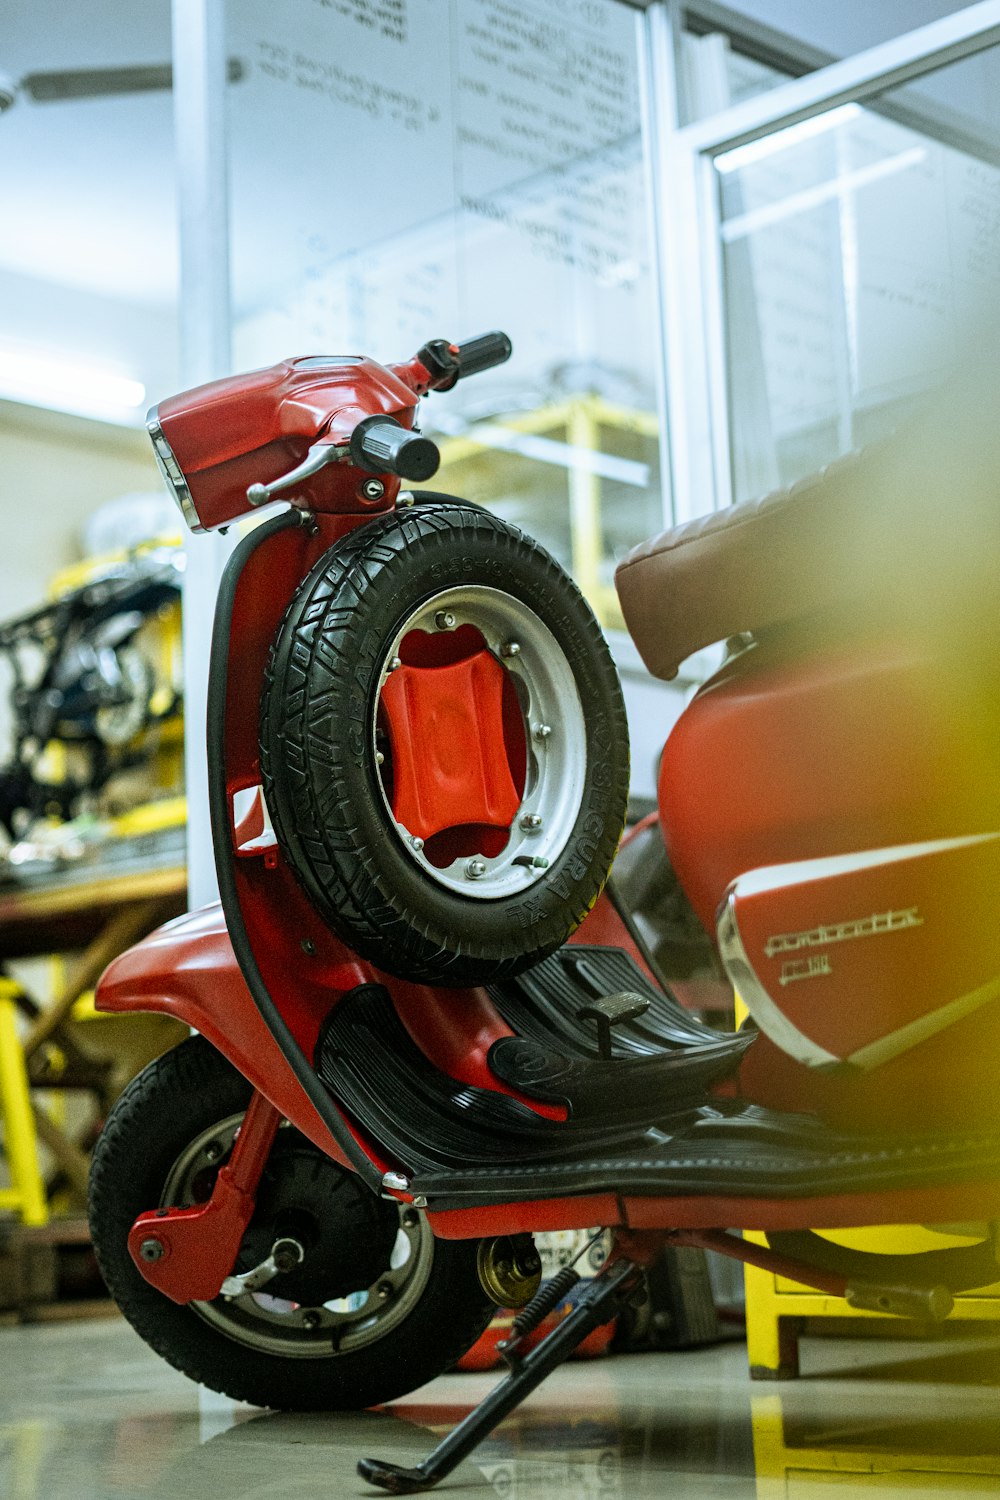 a red scooter is parked in a garage